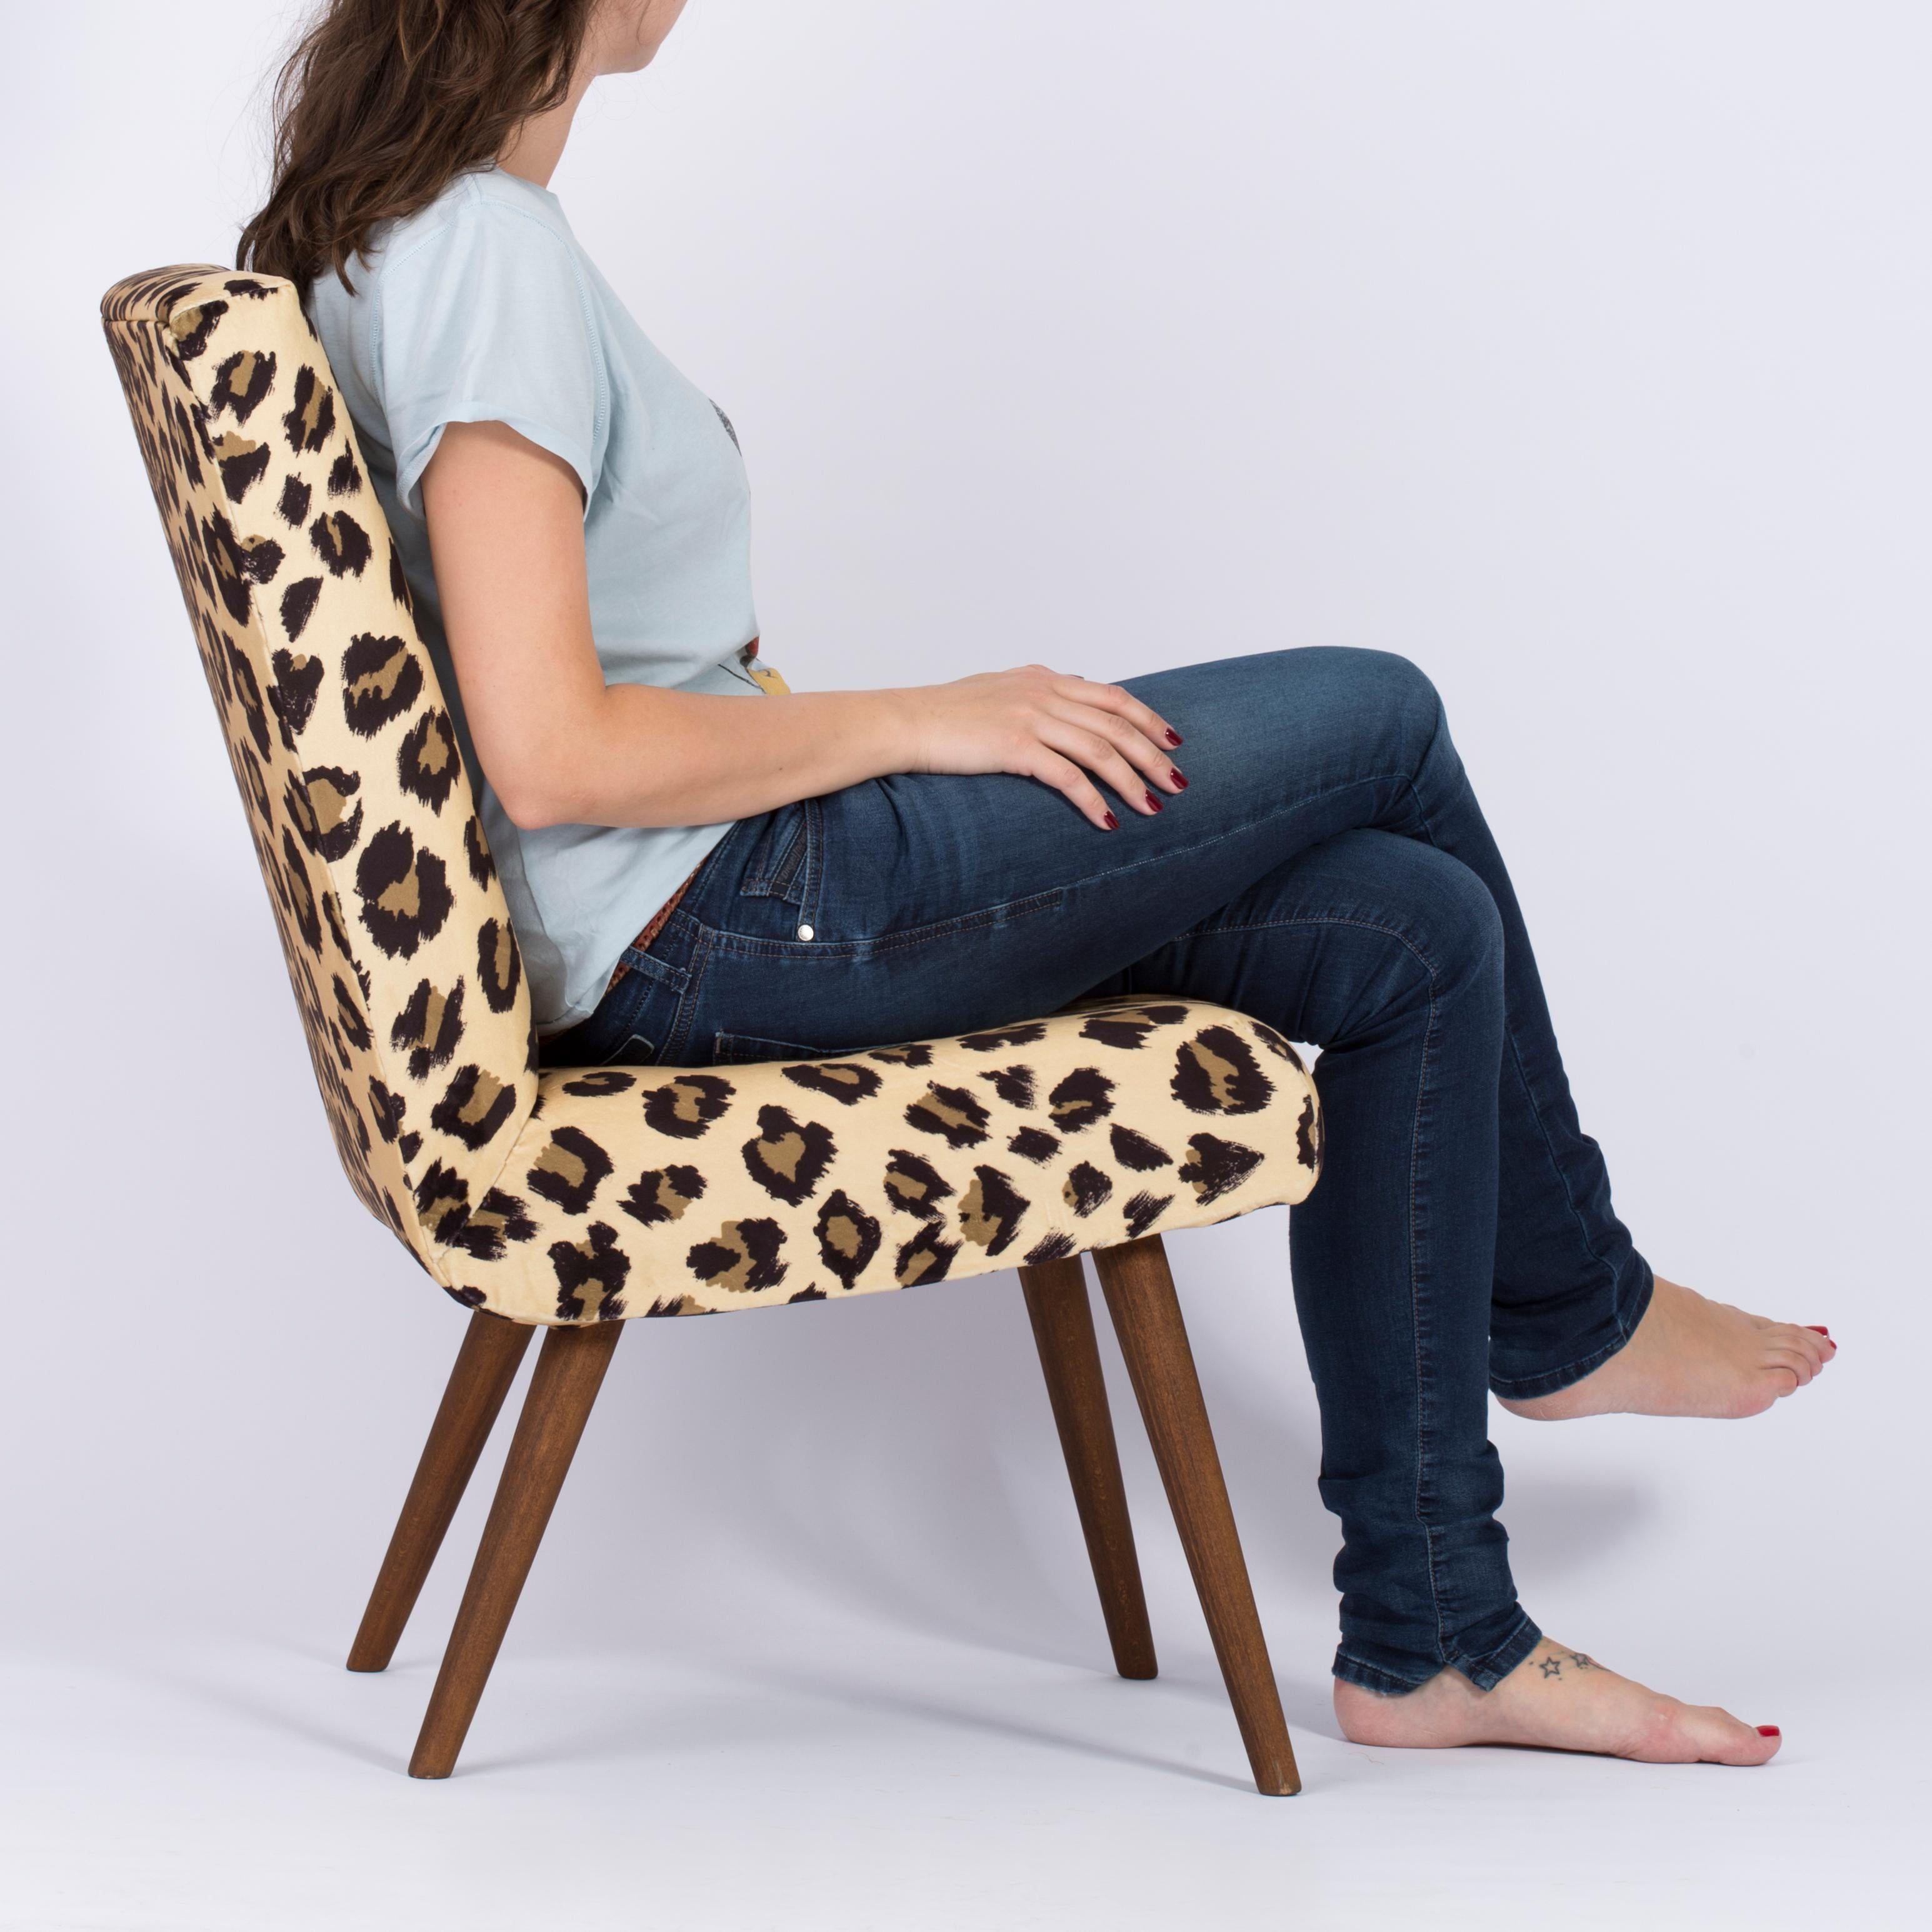 Set of Two Mid-Century Modern Leopard Print Chairs, 1960s, Germany For Sale 1